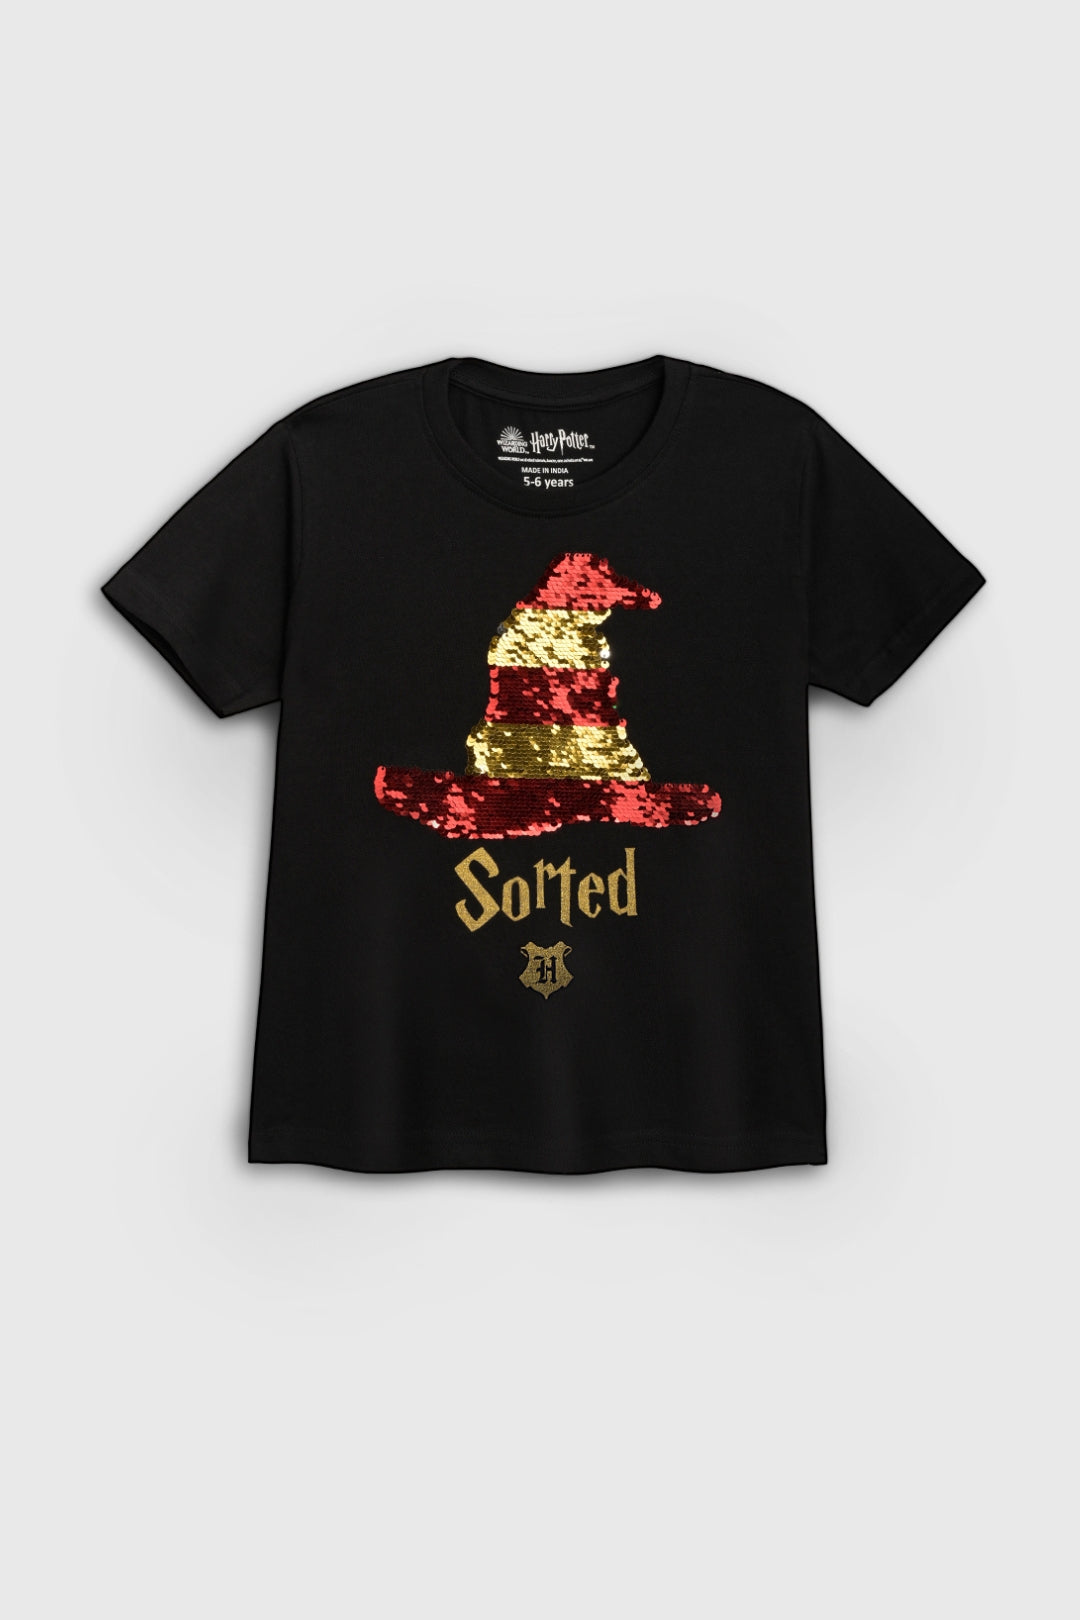 Sorted Harry Potter™ Reversible Sequins Tee Unisex for Family